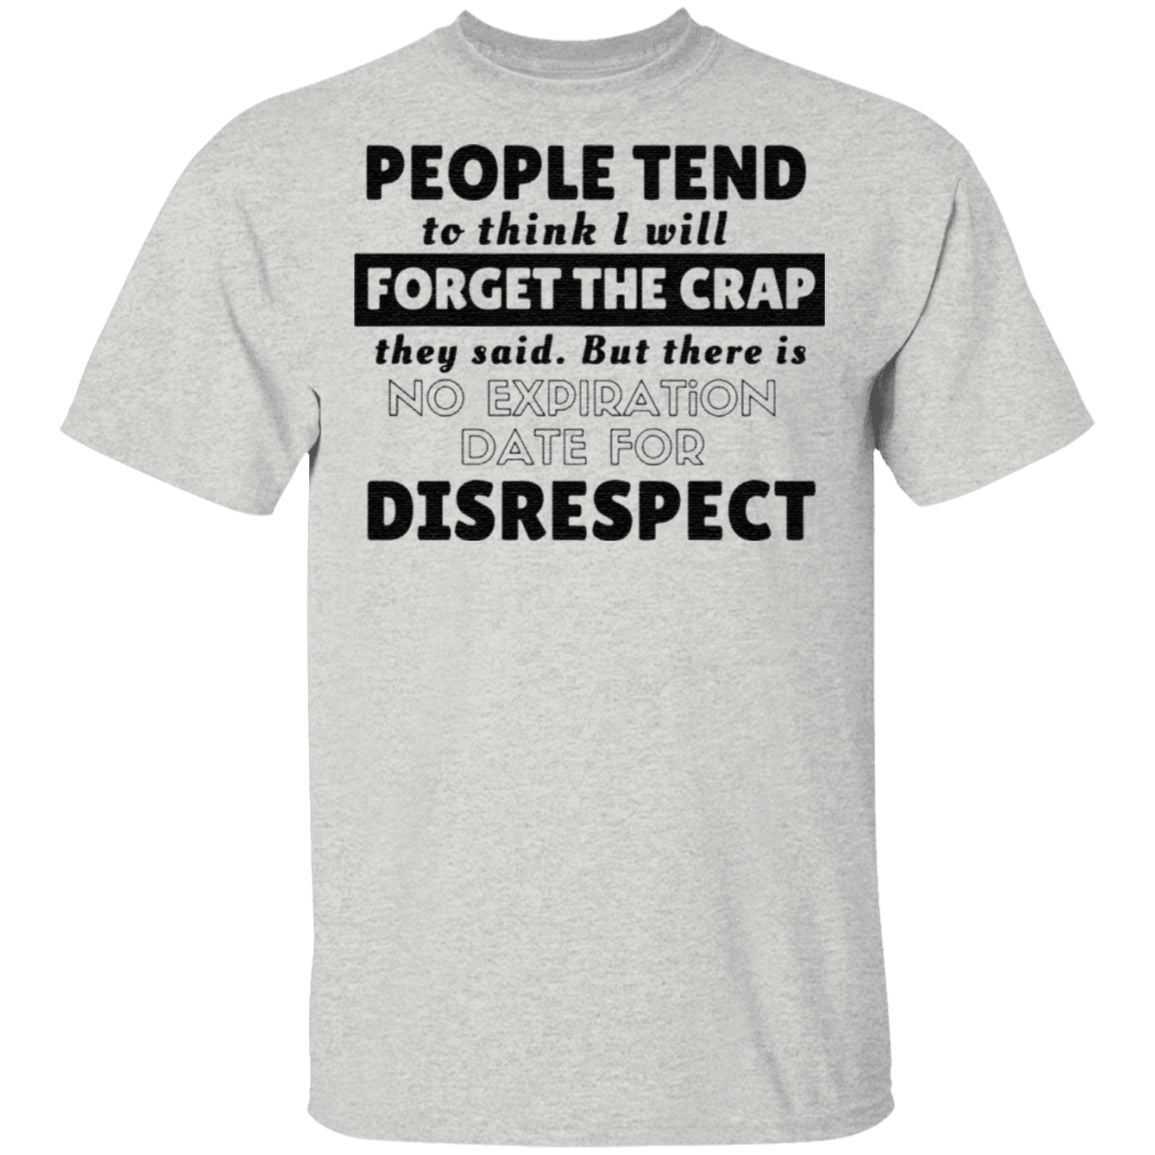 People tend to think I will forget the crap they said but there is no expiration date for disrespect t shirt